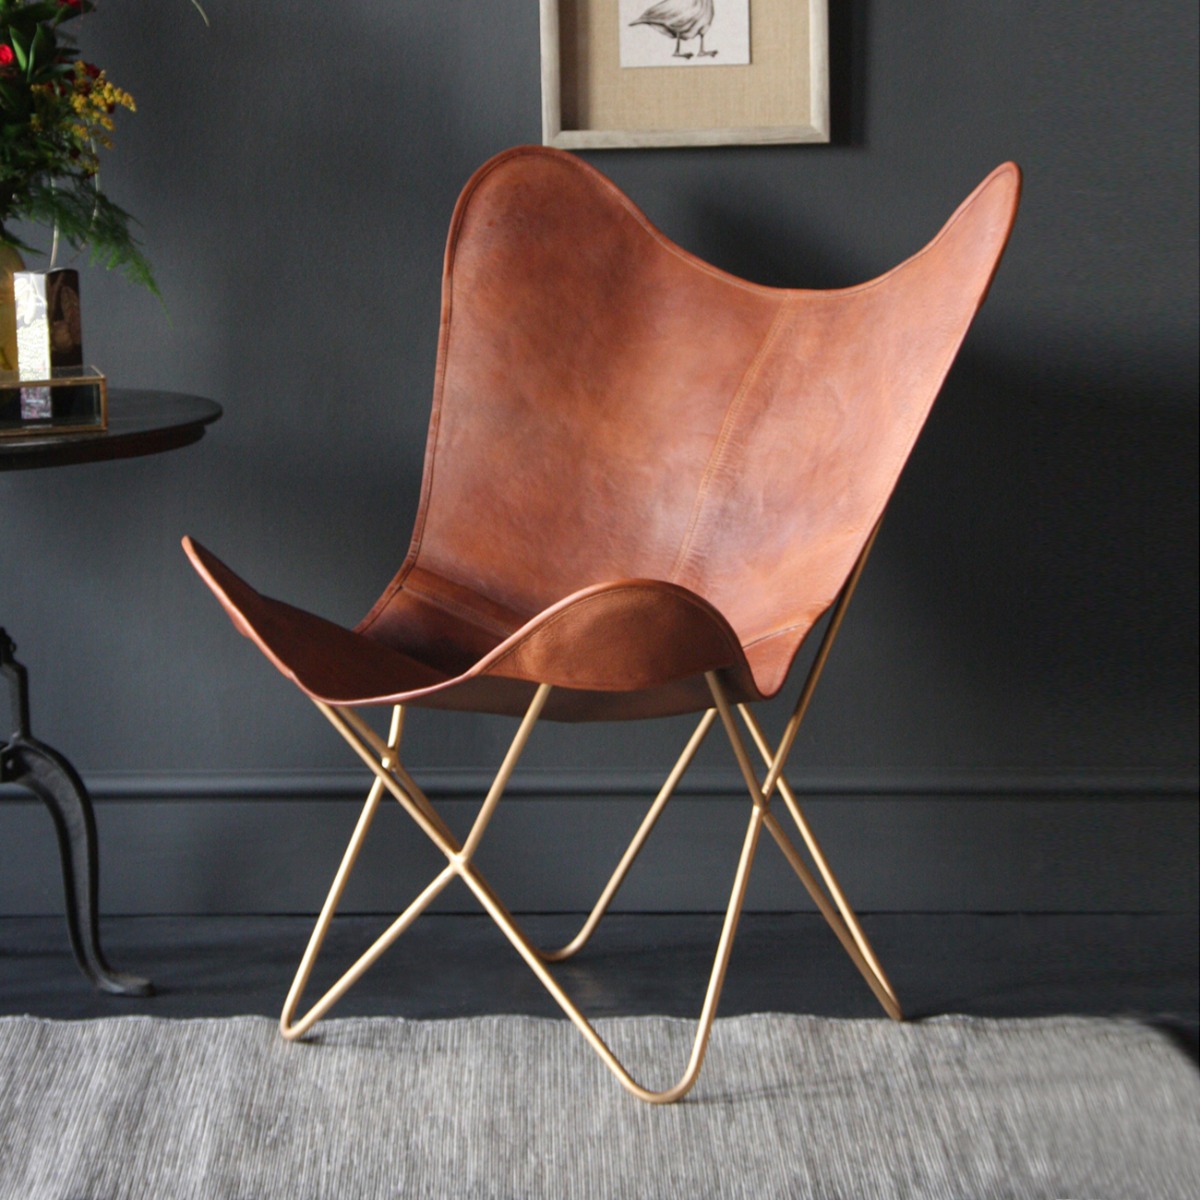 Our Butterfly Chair makes a great vintage option for the home.